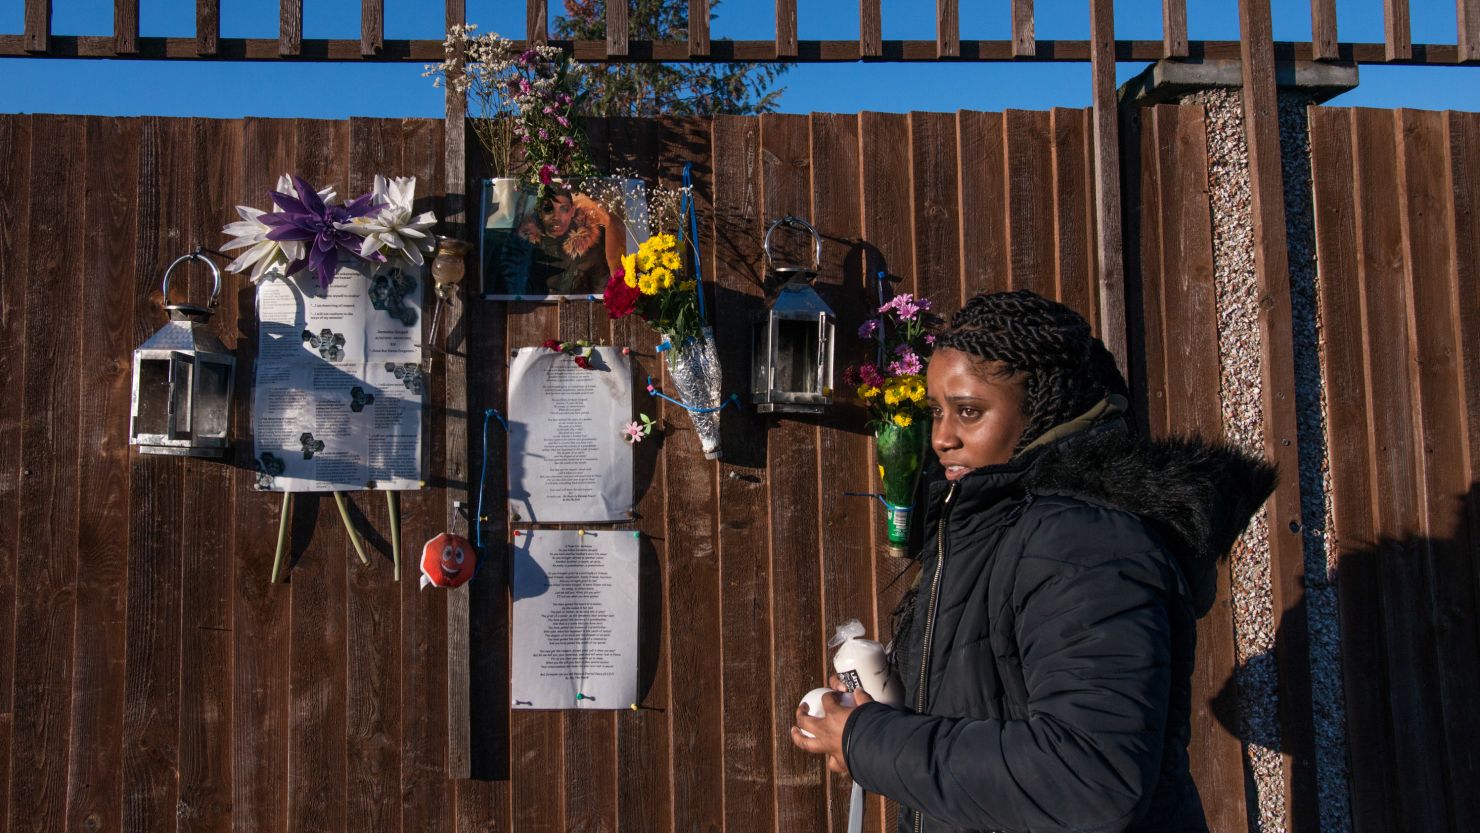 Tilisha Goupall tends a memorial to her younger brother, Jermaine Goupall, at the location where he was stabbed to death in south London in August 2017.